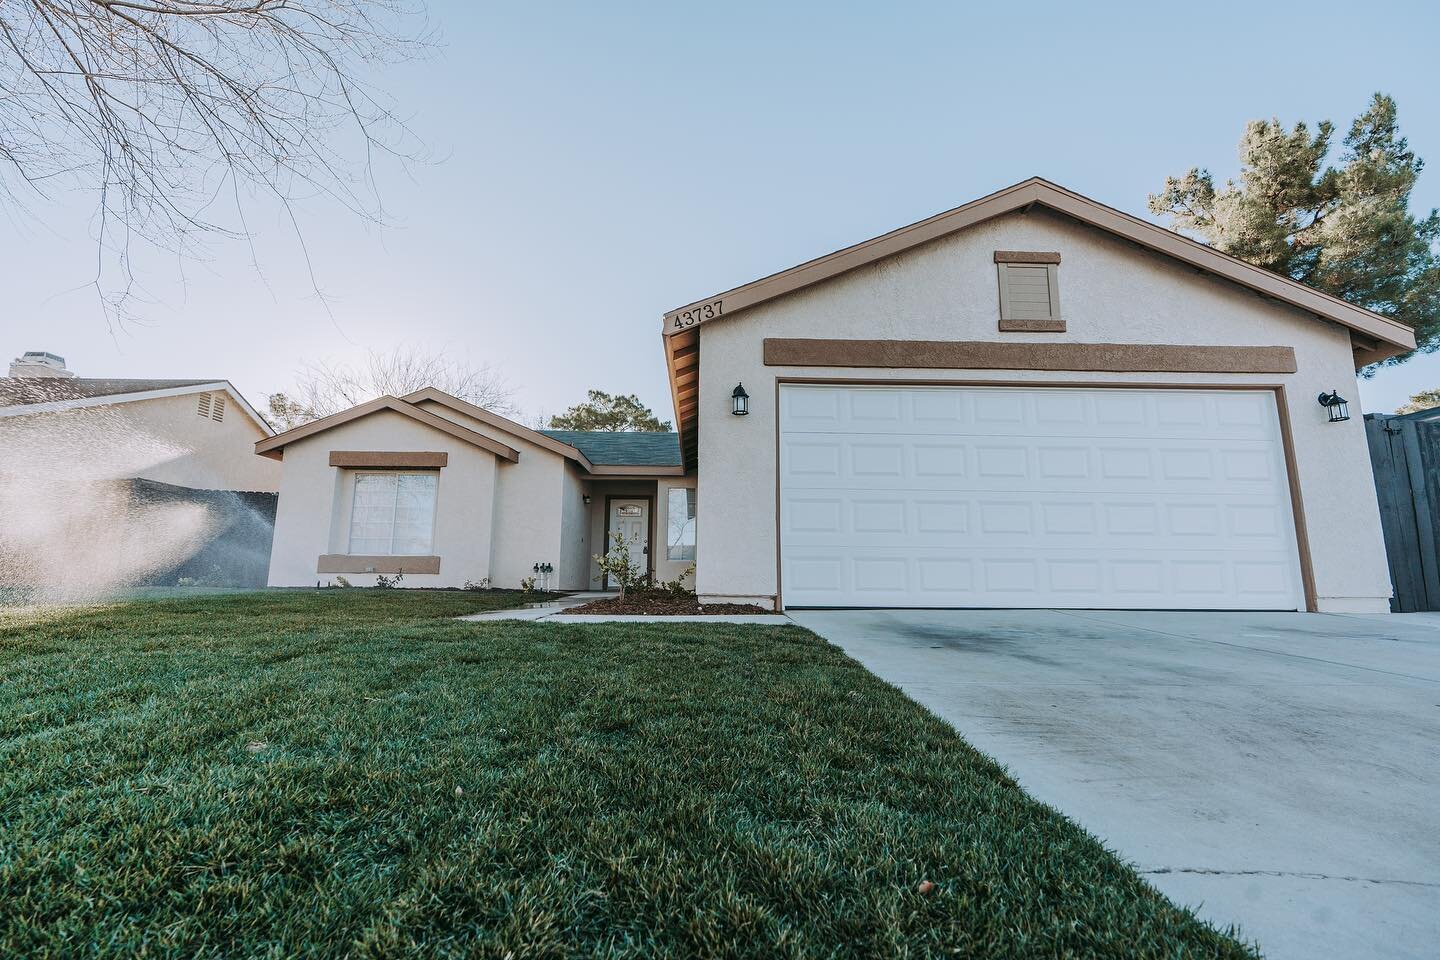 On the market and ready for potential owners to come and take a look! 👏🏻 ⁣
⁣
4 bedroom  2 bath  1,487 sq ft  43737 Serenity Ct 
⁣
Need more details or want to go check it out? Contact us! ⁣
⁣
#newhome #economu #homeviews #homerenovation ##onthemark